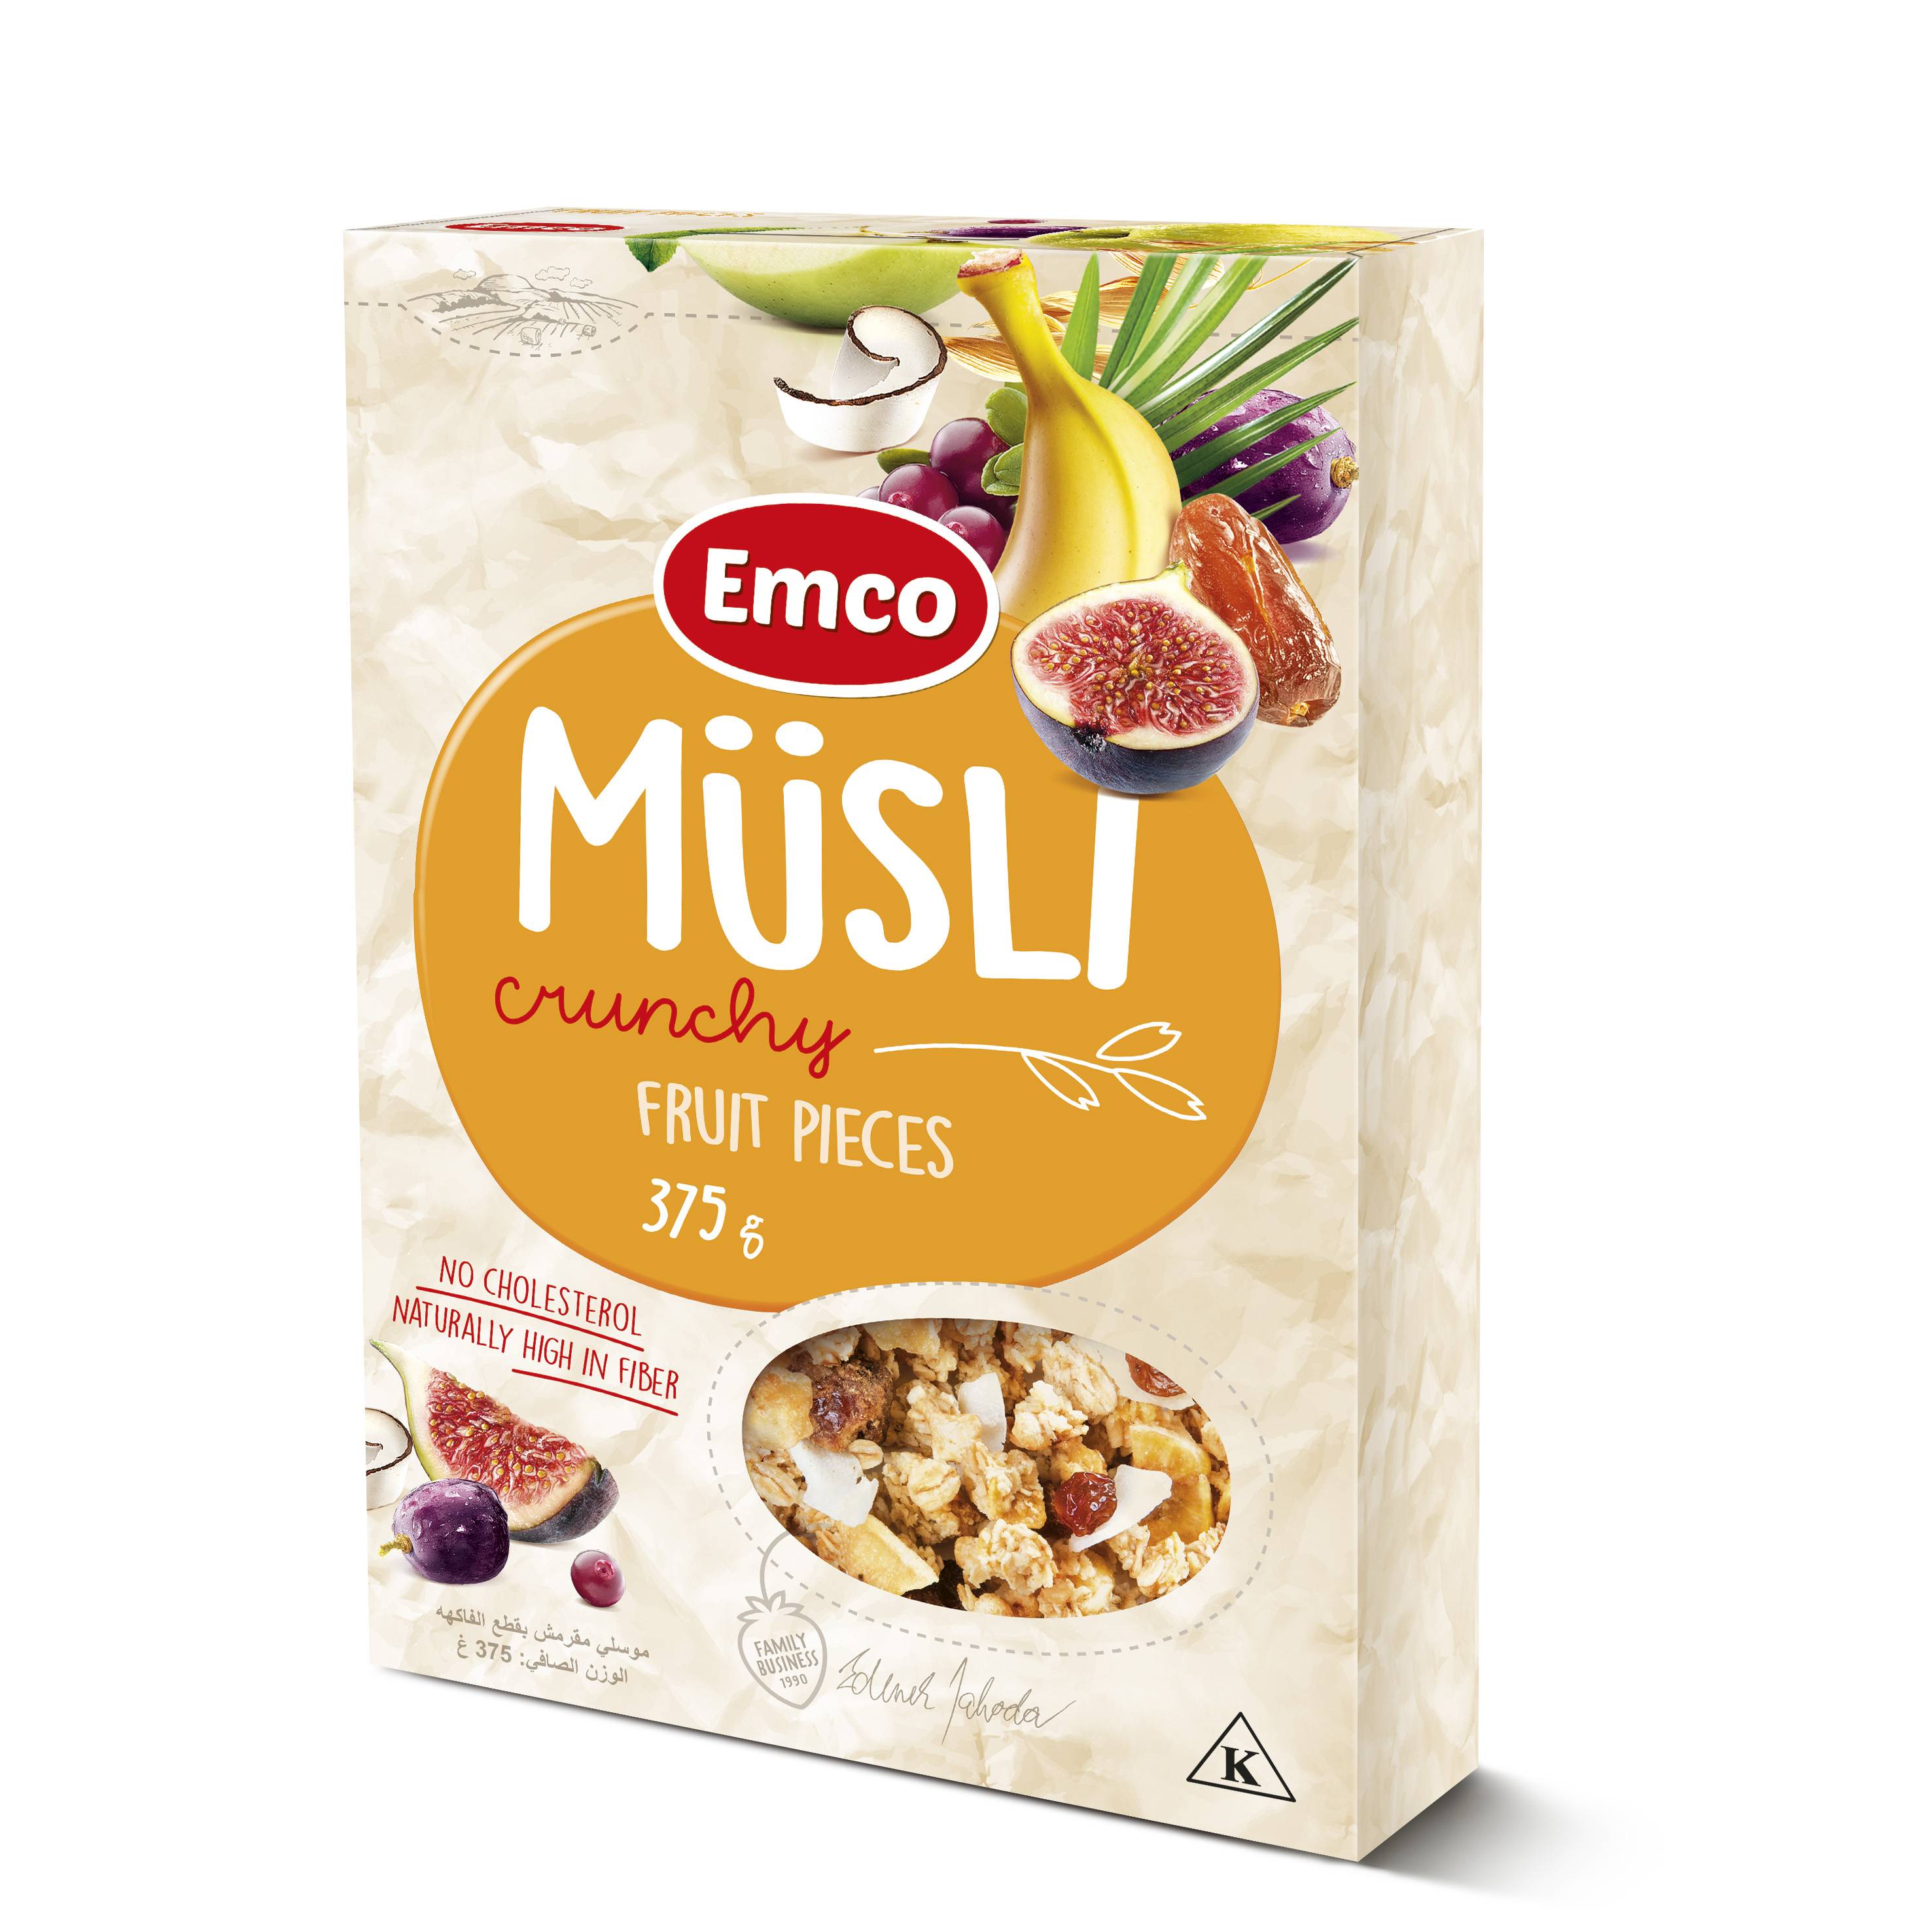 EMCO Crunchy Muesli With Fruit Pieces, 375g